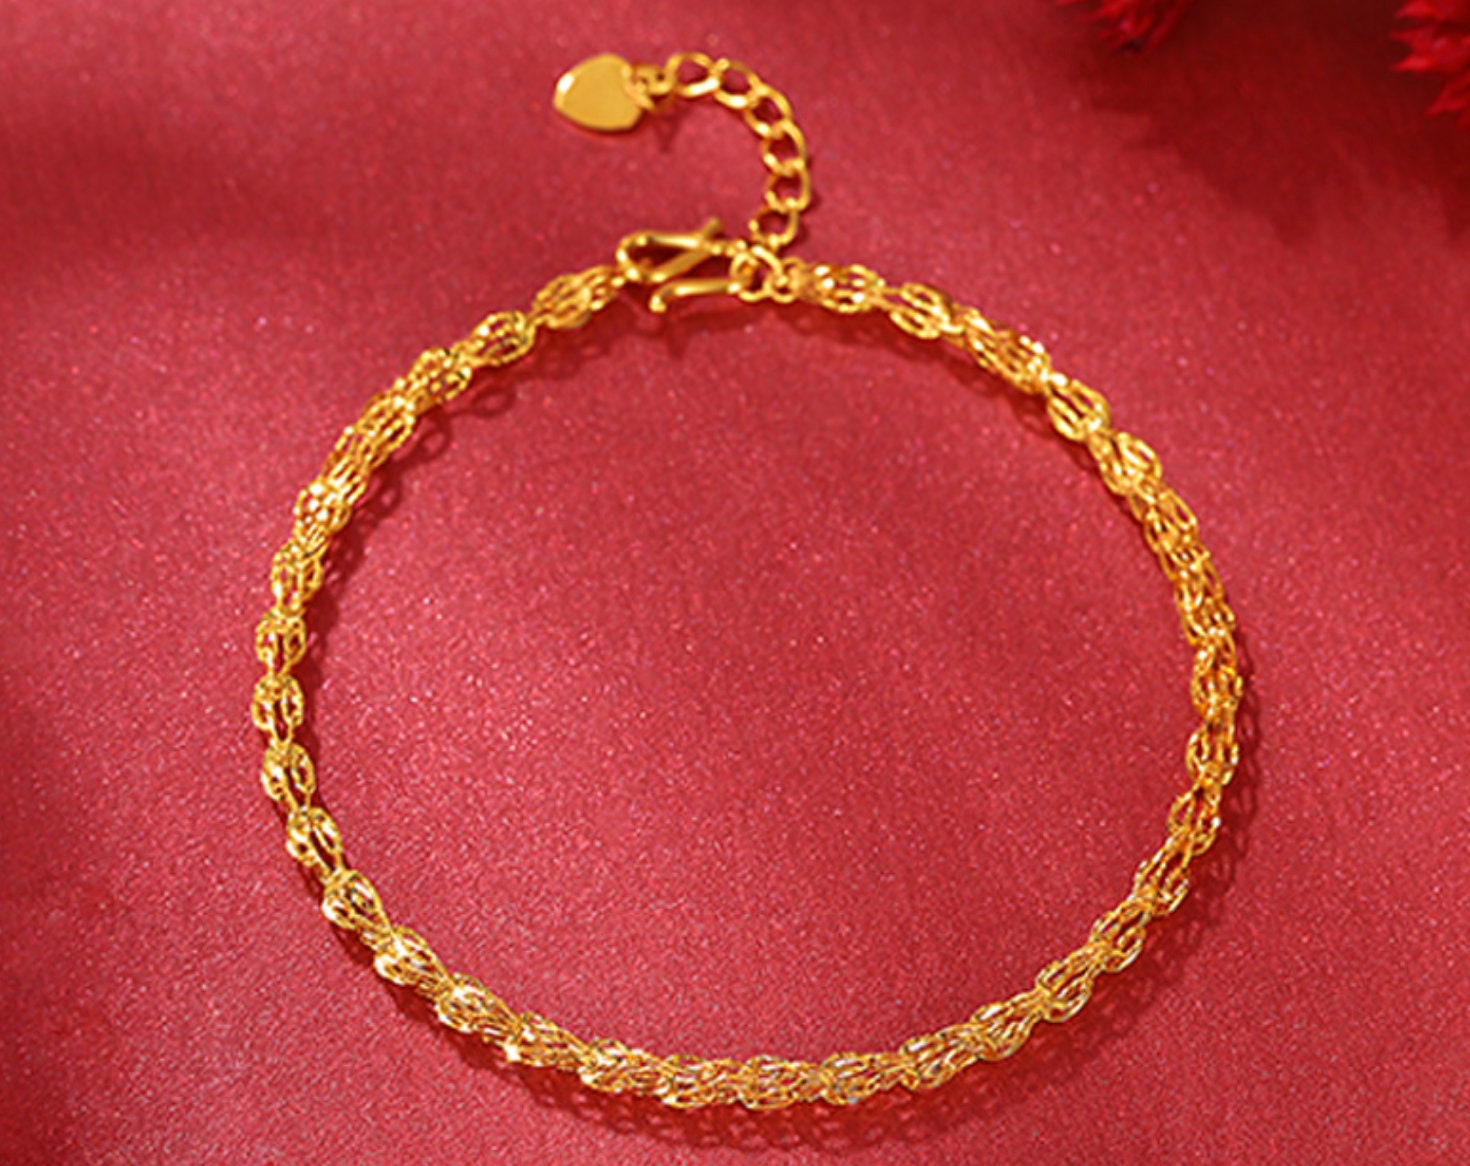 Real Gold 24k Phoenix Temple Jewellery Bangles Gold Bracelet Womens  Imitation Color Mid Autumn Gift, Pure 18k 999 Plated Gold Jewelry From  Nan05, $7.7 | DHgate.Com